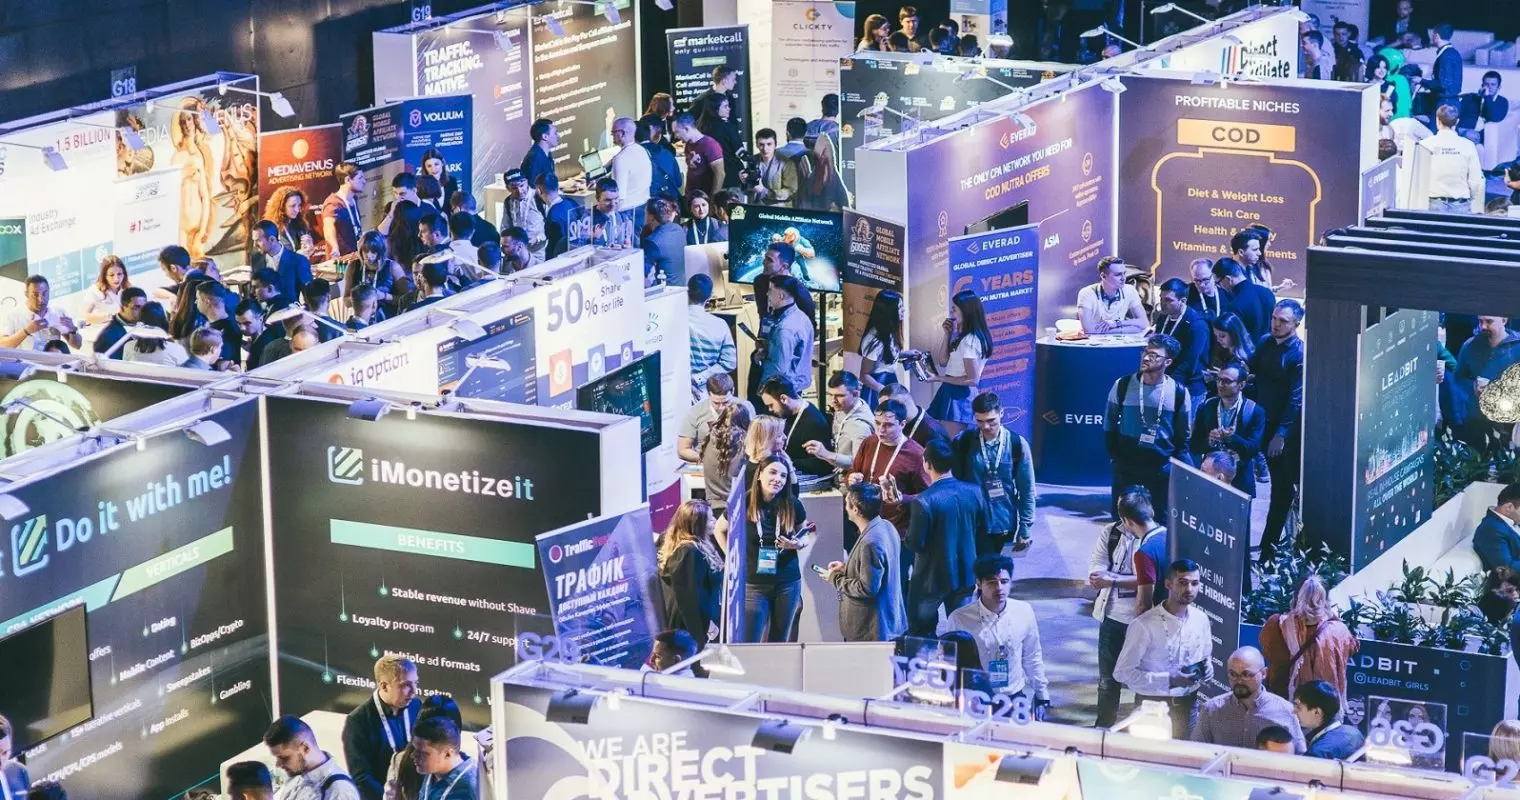 Why Affiliate Marketing Conferences Are a Must